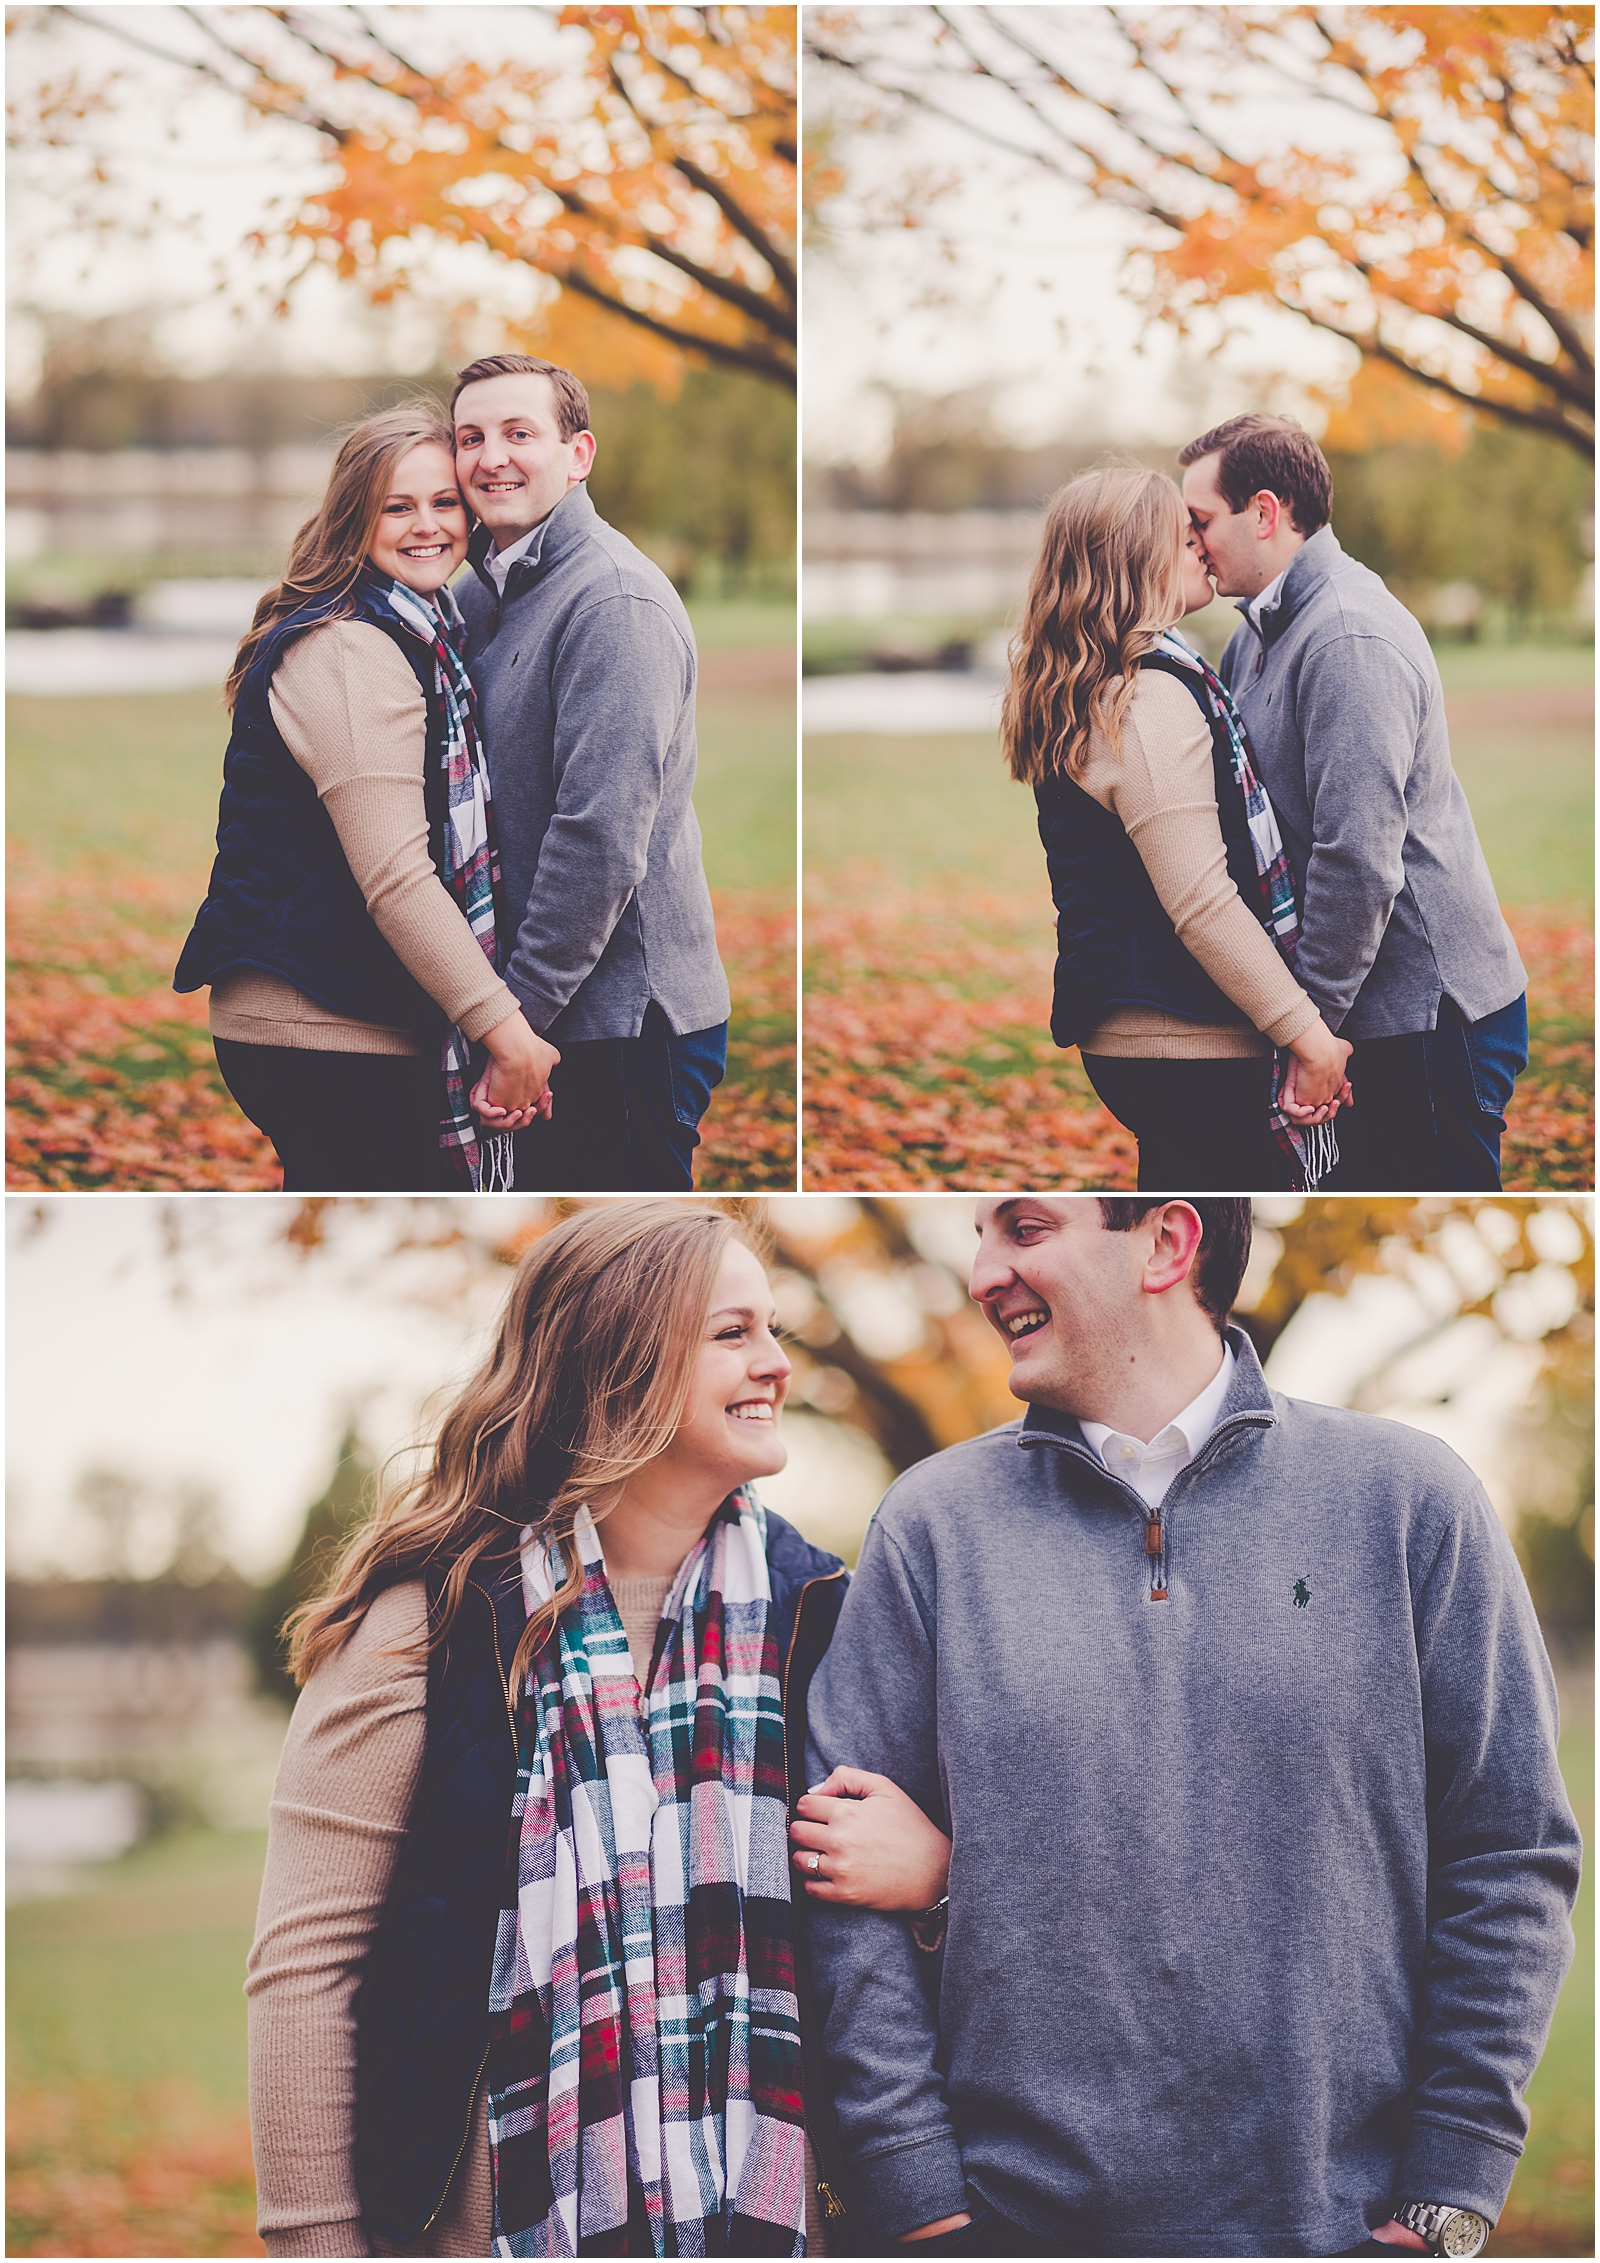 Meredith and Ryan's downtown Kankakee engagement photos and Kankakee Country Club engagement session in Kankakee with Chicagoland photographer Kara Evans Photographer.